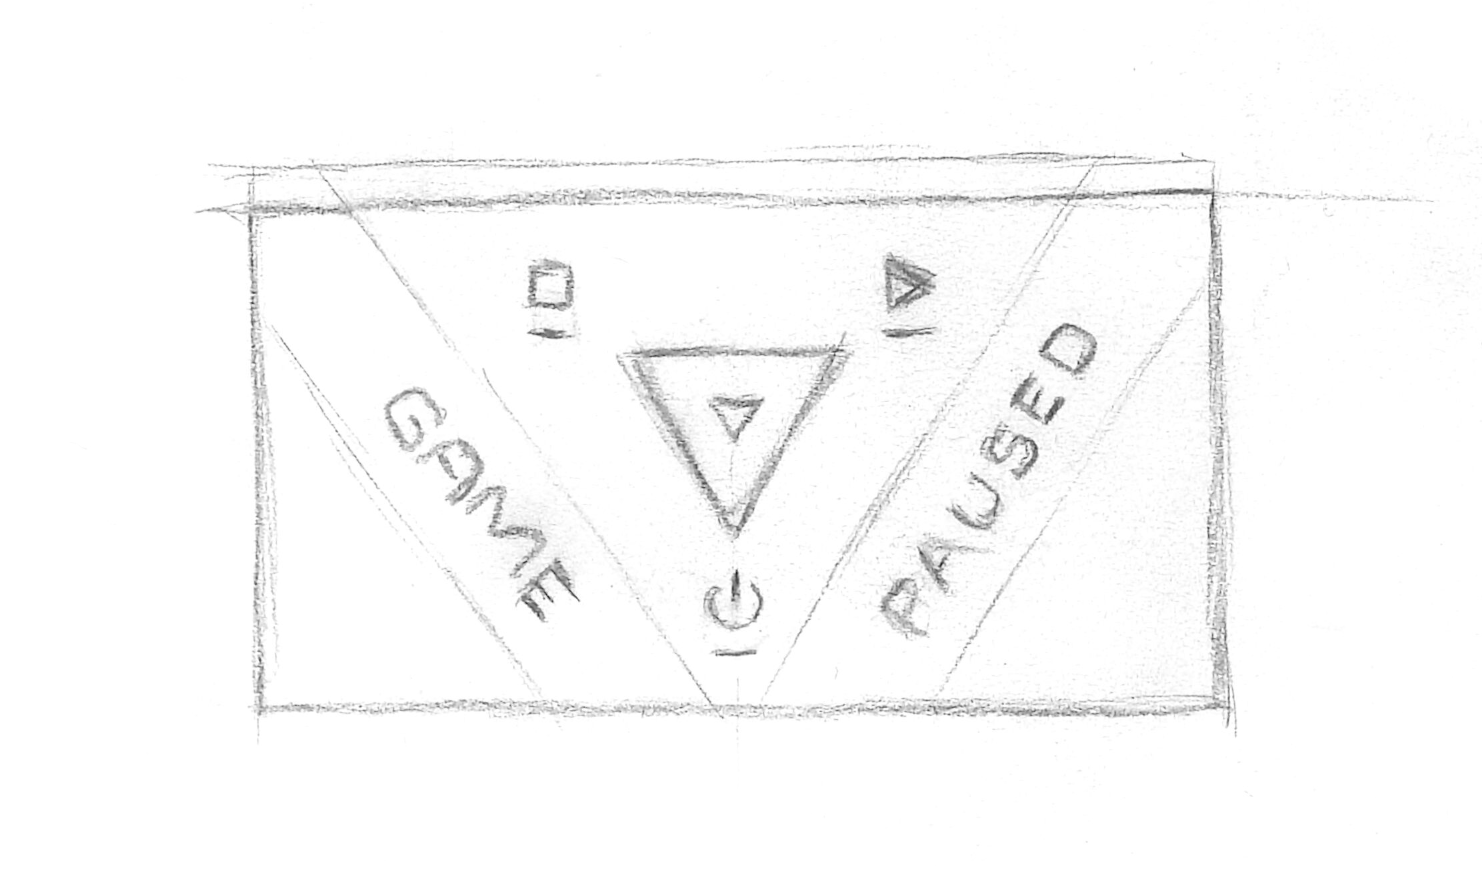 A sketch of the new design